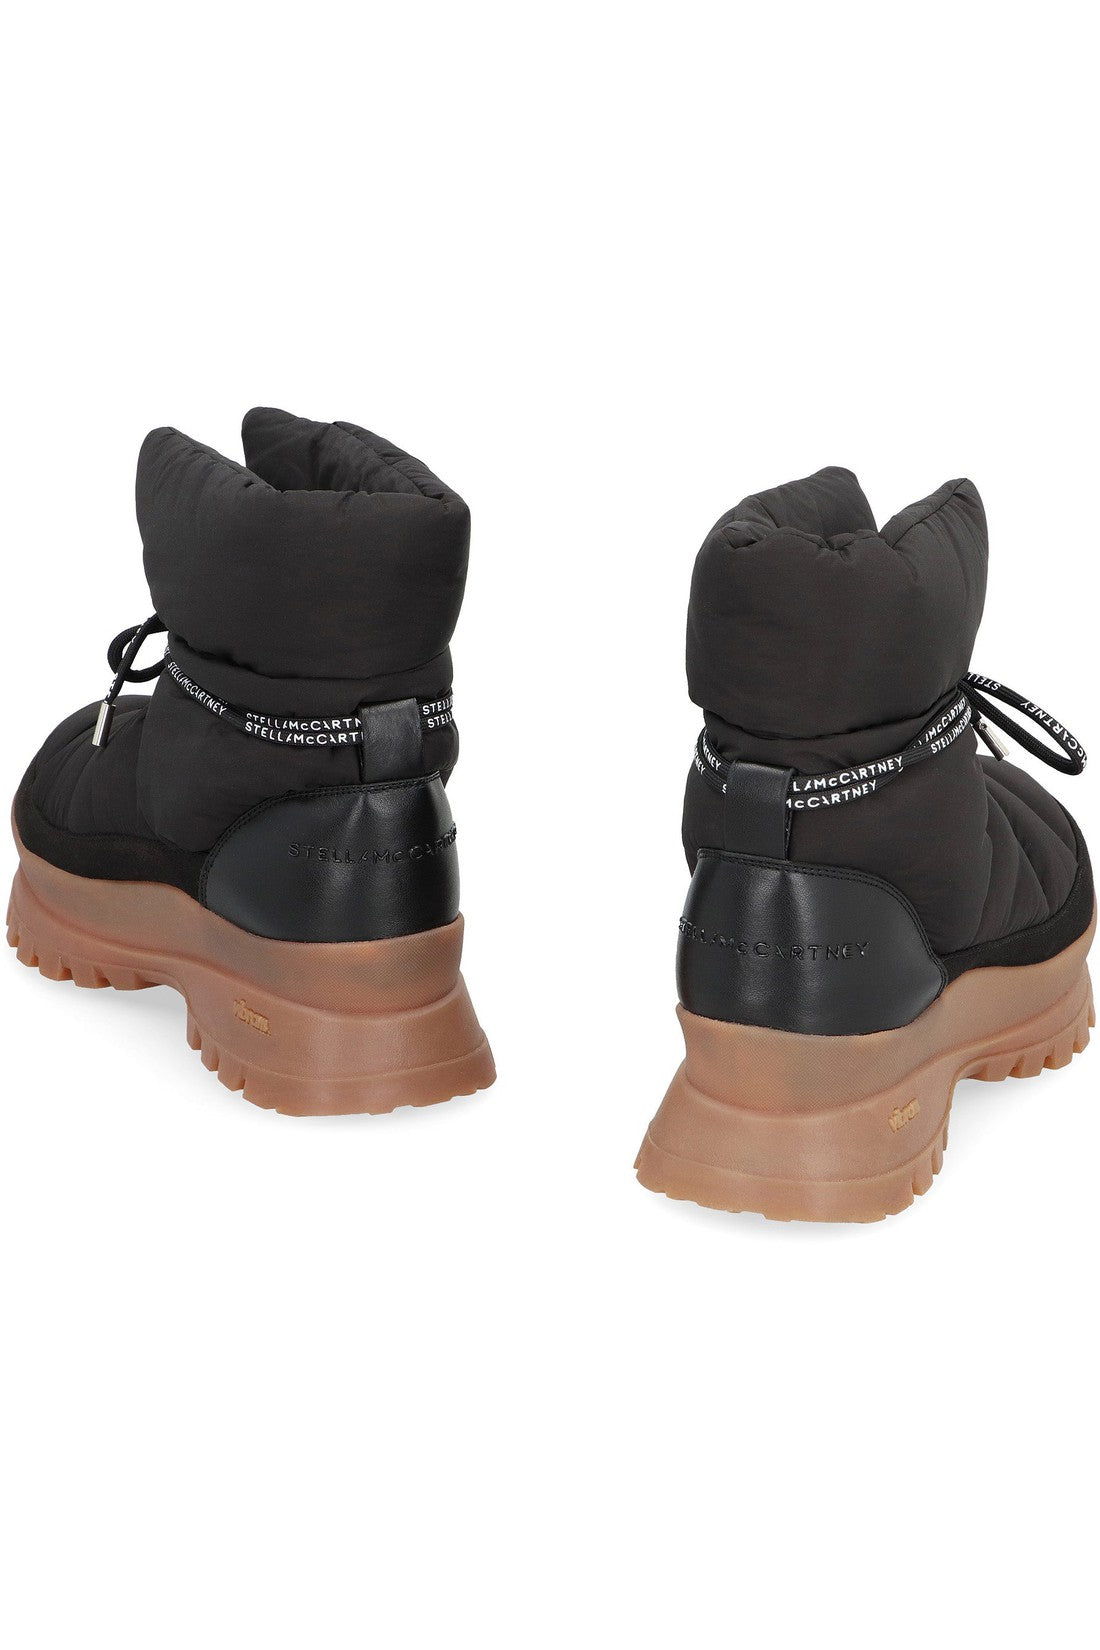 Stella McCartney-OUTLET-SALE-Trace hiking boots-ARCHIVIST